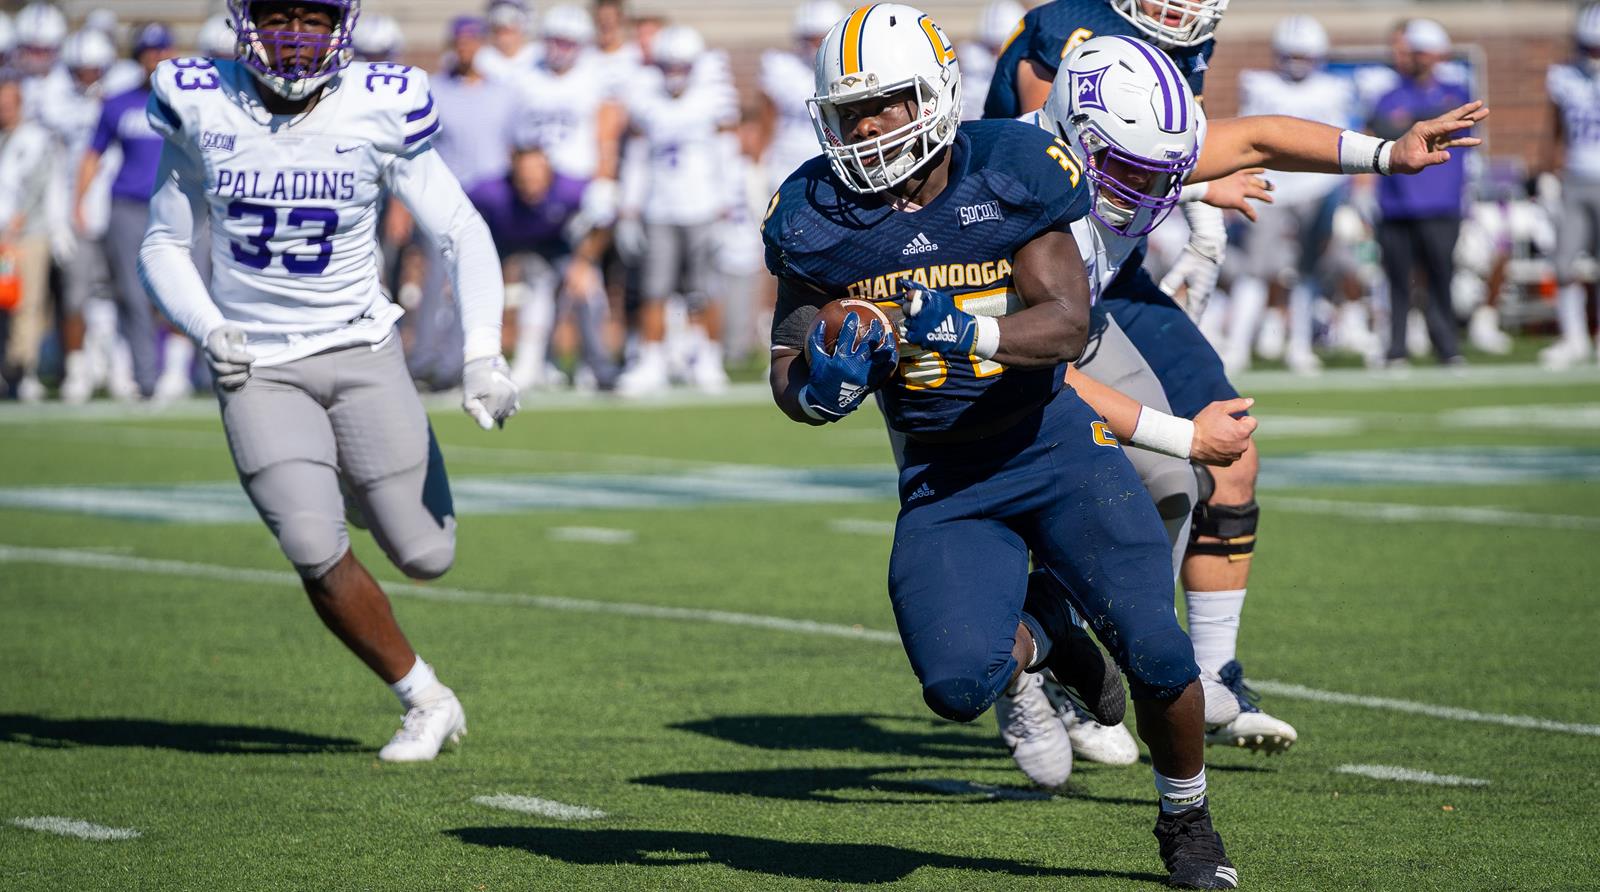 2021 FCS Season Preview: Chattanooga